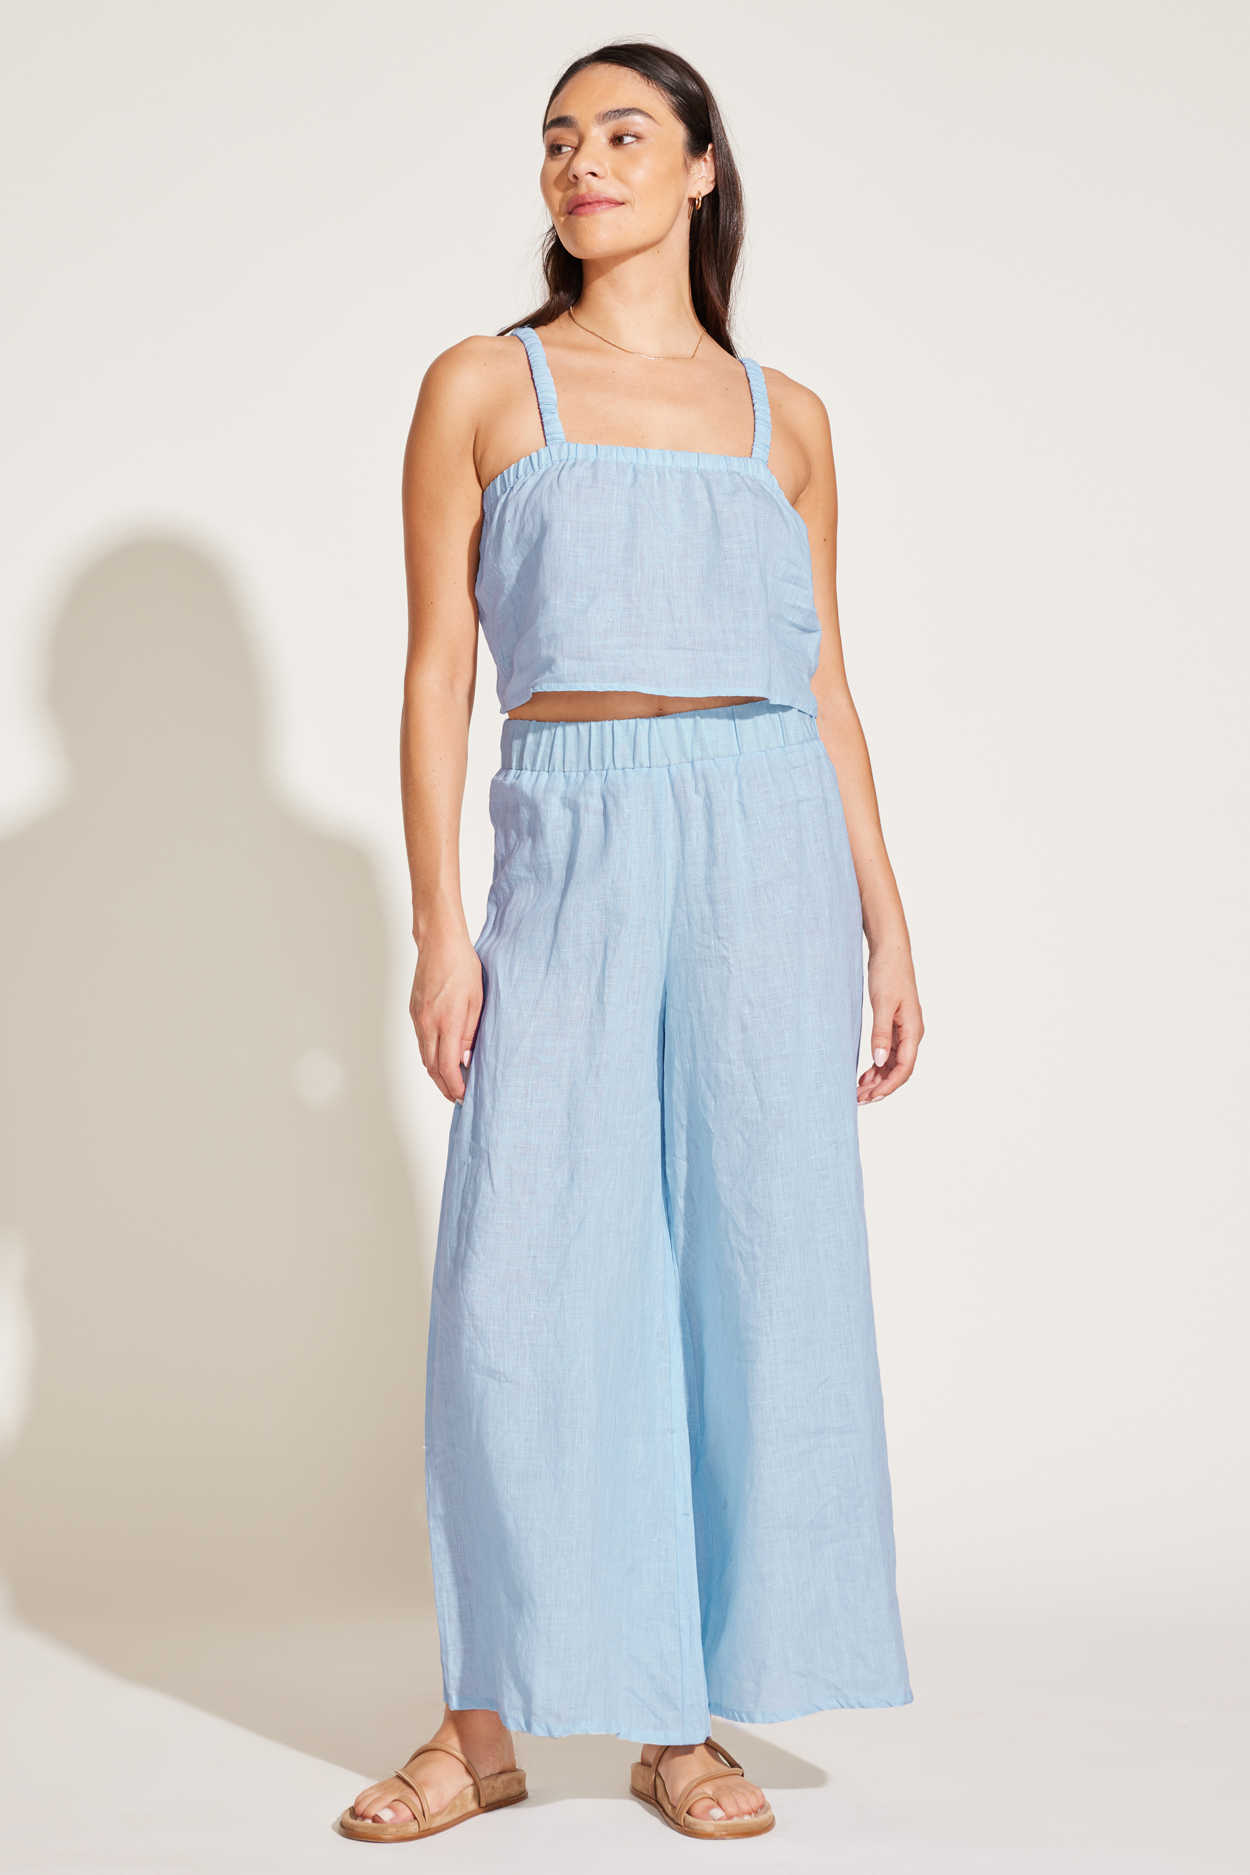 A model in a baby blue tank and wide leg pants set.